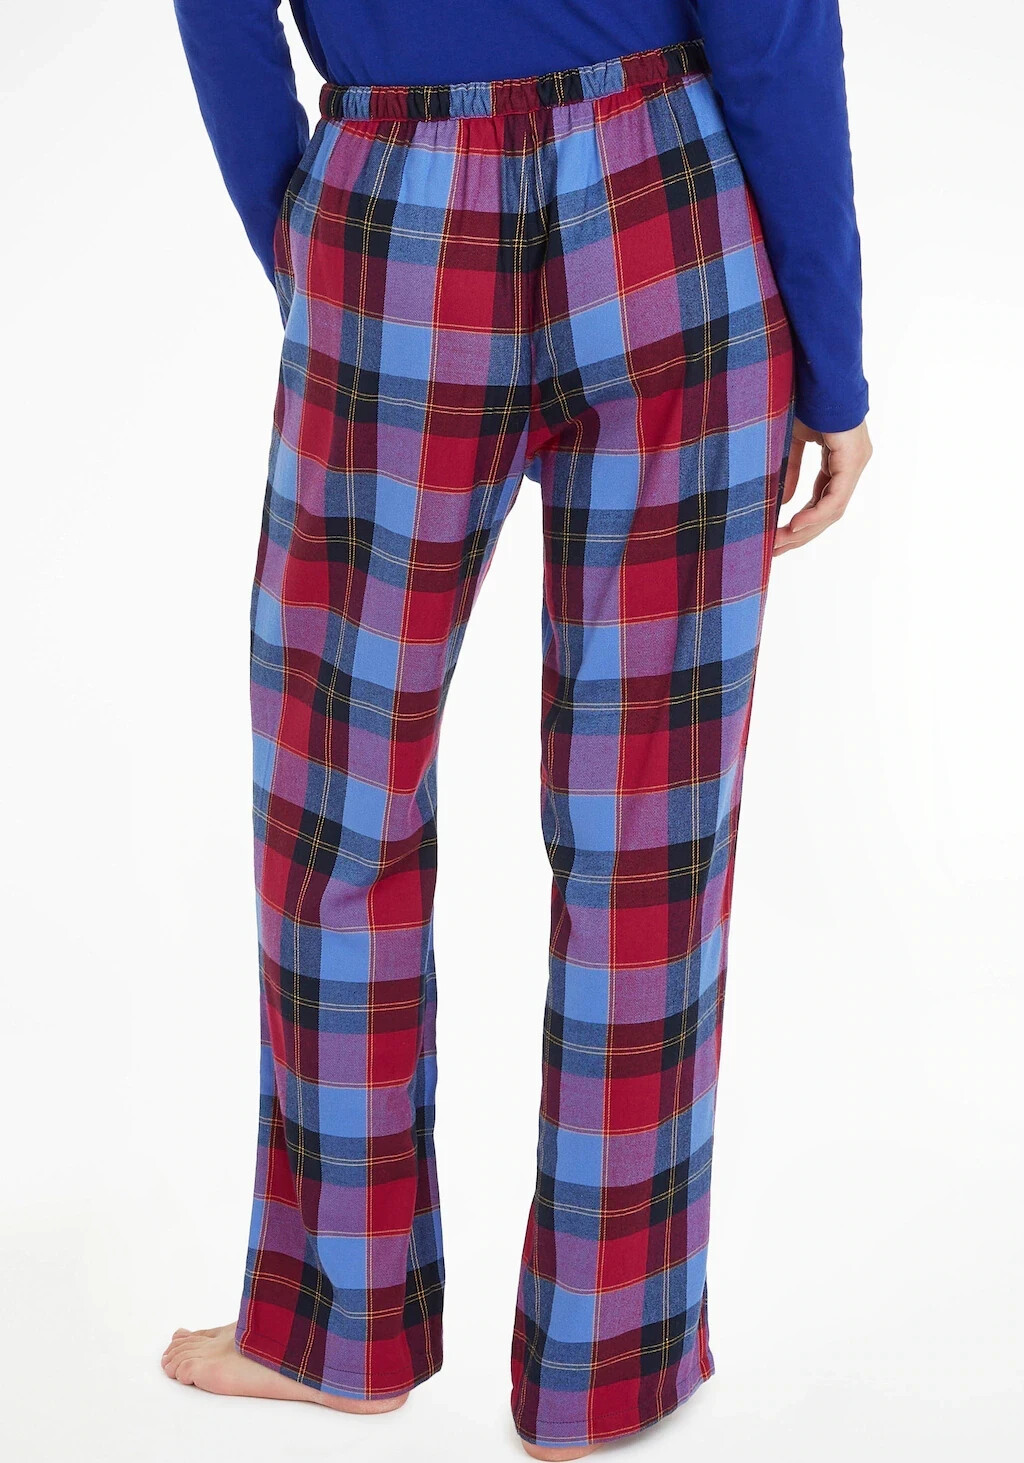 Relaxed Flannel PJ Pants | Gap Factory